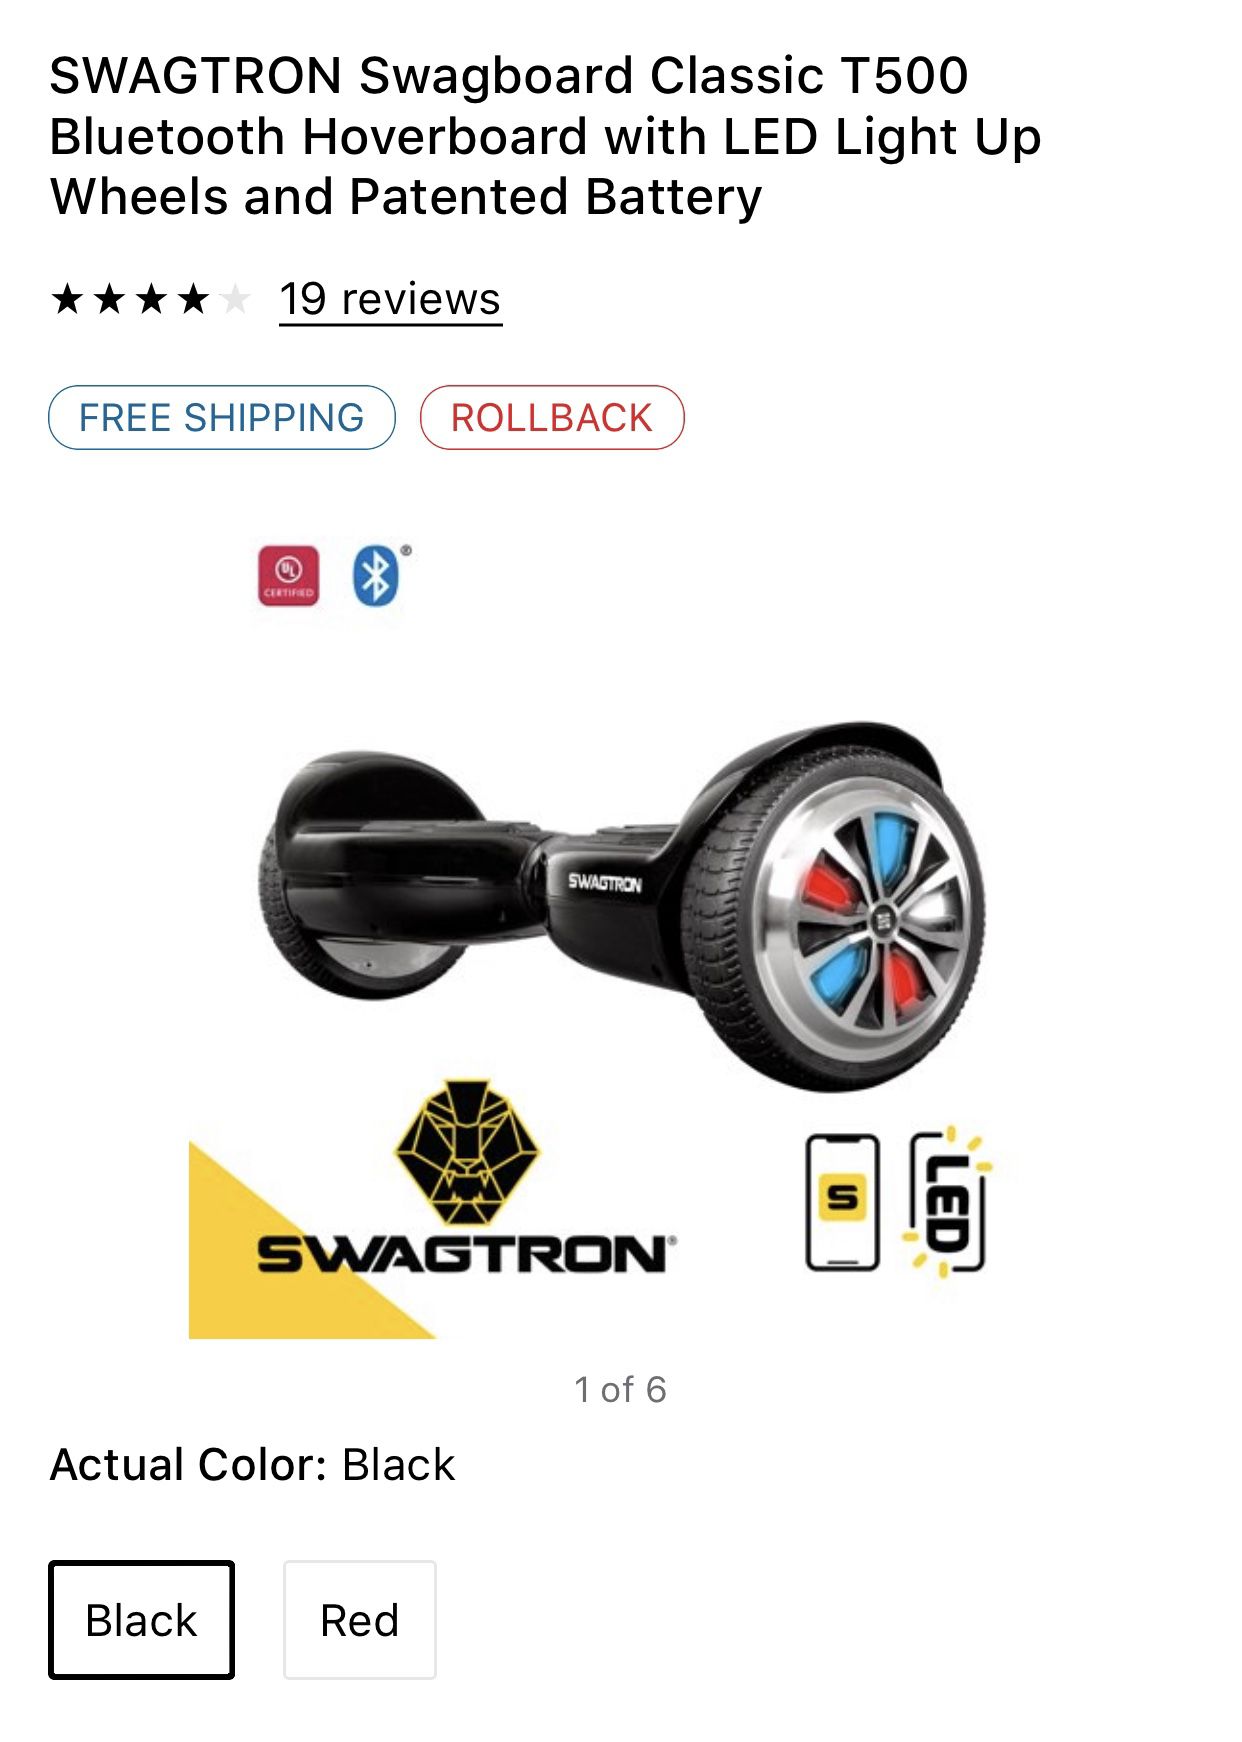 Swagtron swagboard classic T500 Bluetooth hover board with led light up wheels